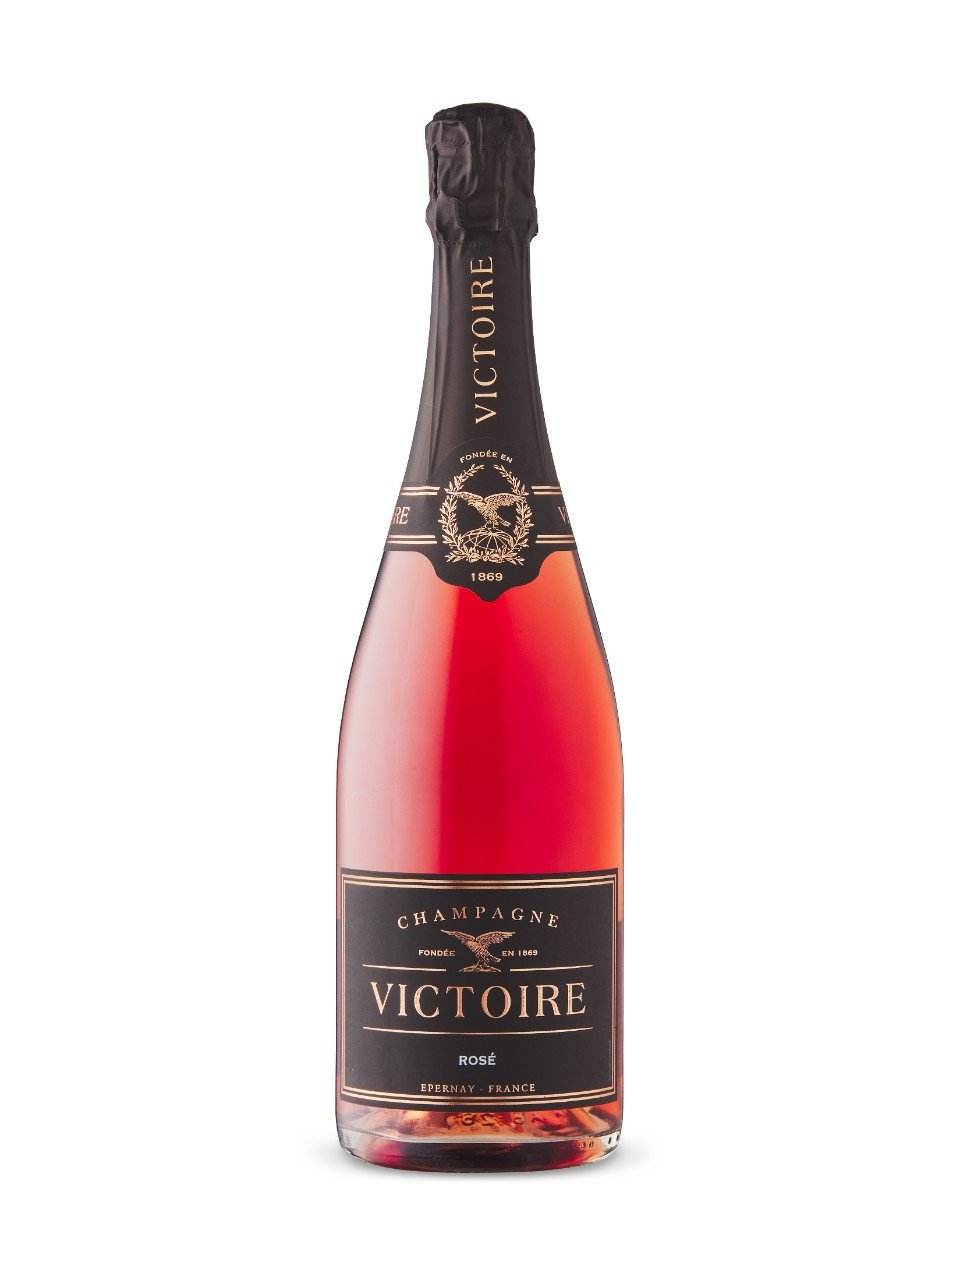 Champagne Victoire Brut Rose | Exquisite Wine & Alcohol Gift Delivery Toronto Canada | Vyno